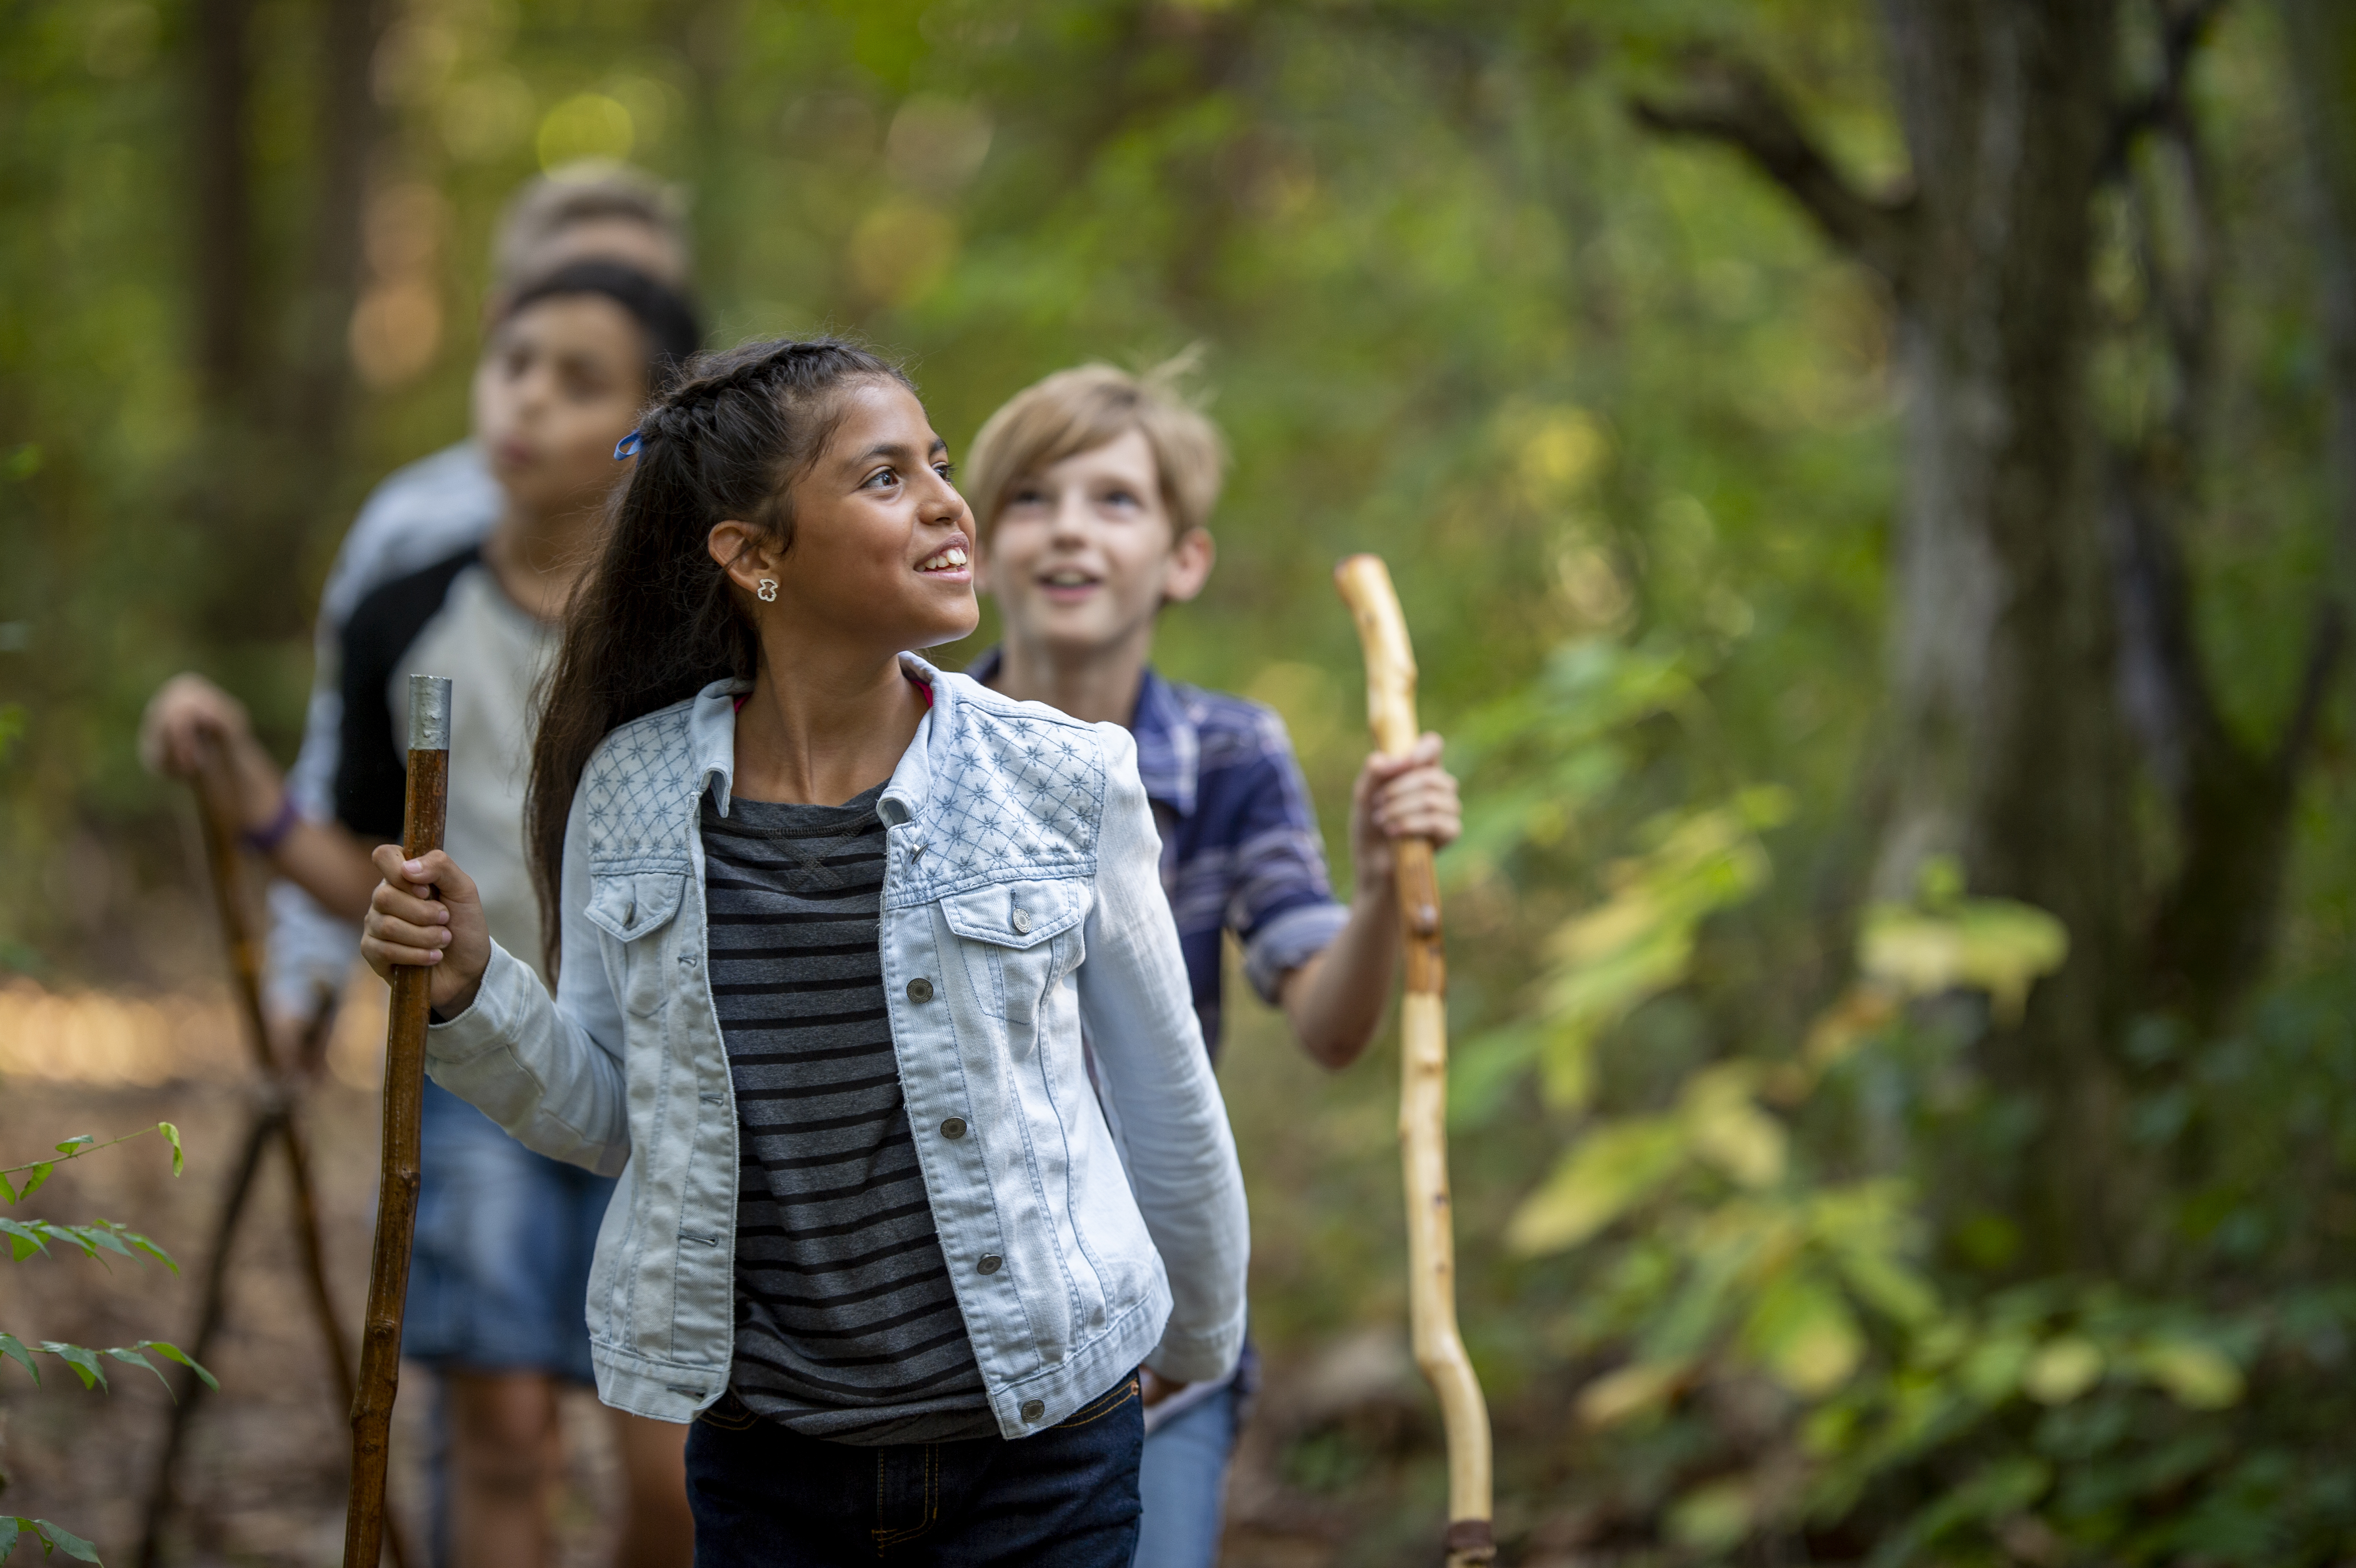 Four children walk in a single file line through a forest scene. They are each holding a walking stick. The first child in line is fully in focus, wearing a light wash denim jacket, dark grey striped shirt, and earrings. They are smiling at the forest in awe and have deep brown skin, brown eyes, and dark hair tied off their face with a blue ribbon. The children behind them are all slightly out of focus but have the same excited smiles.